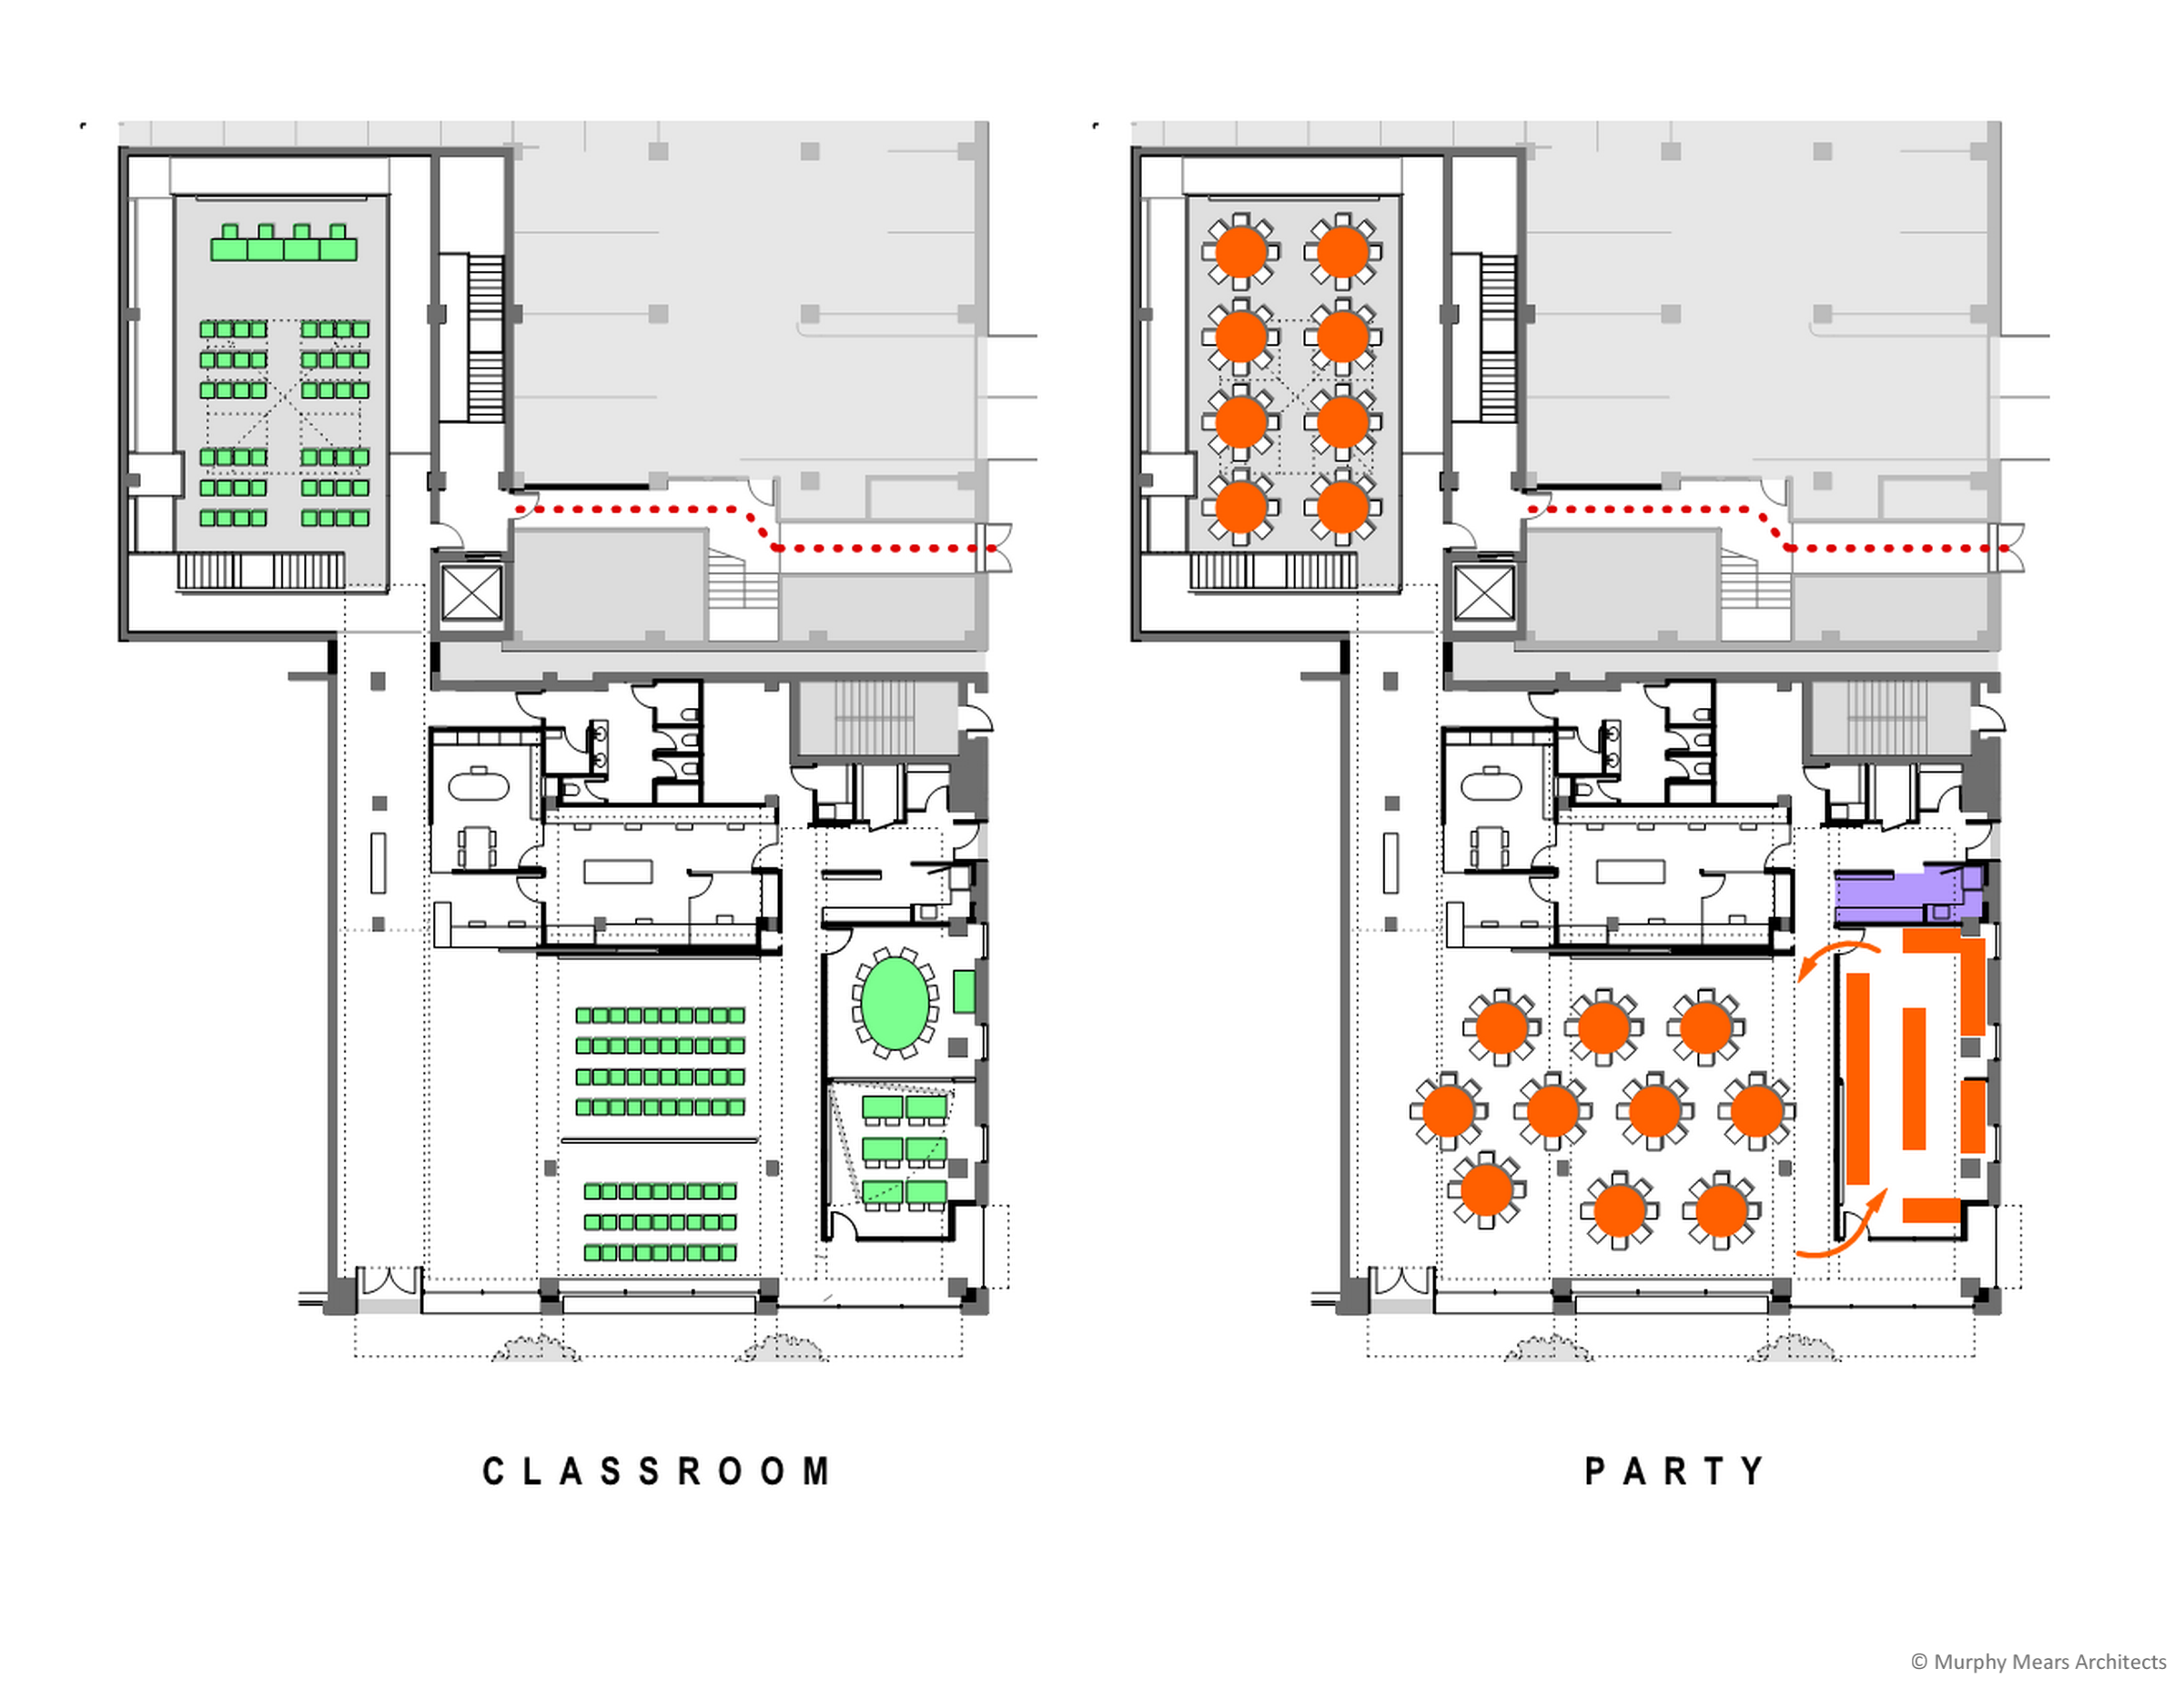 Architecture Center Houston - Competition Diagram - Flexible Use ---> Classrooms and Event Space.